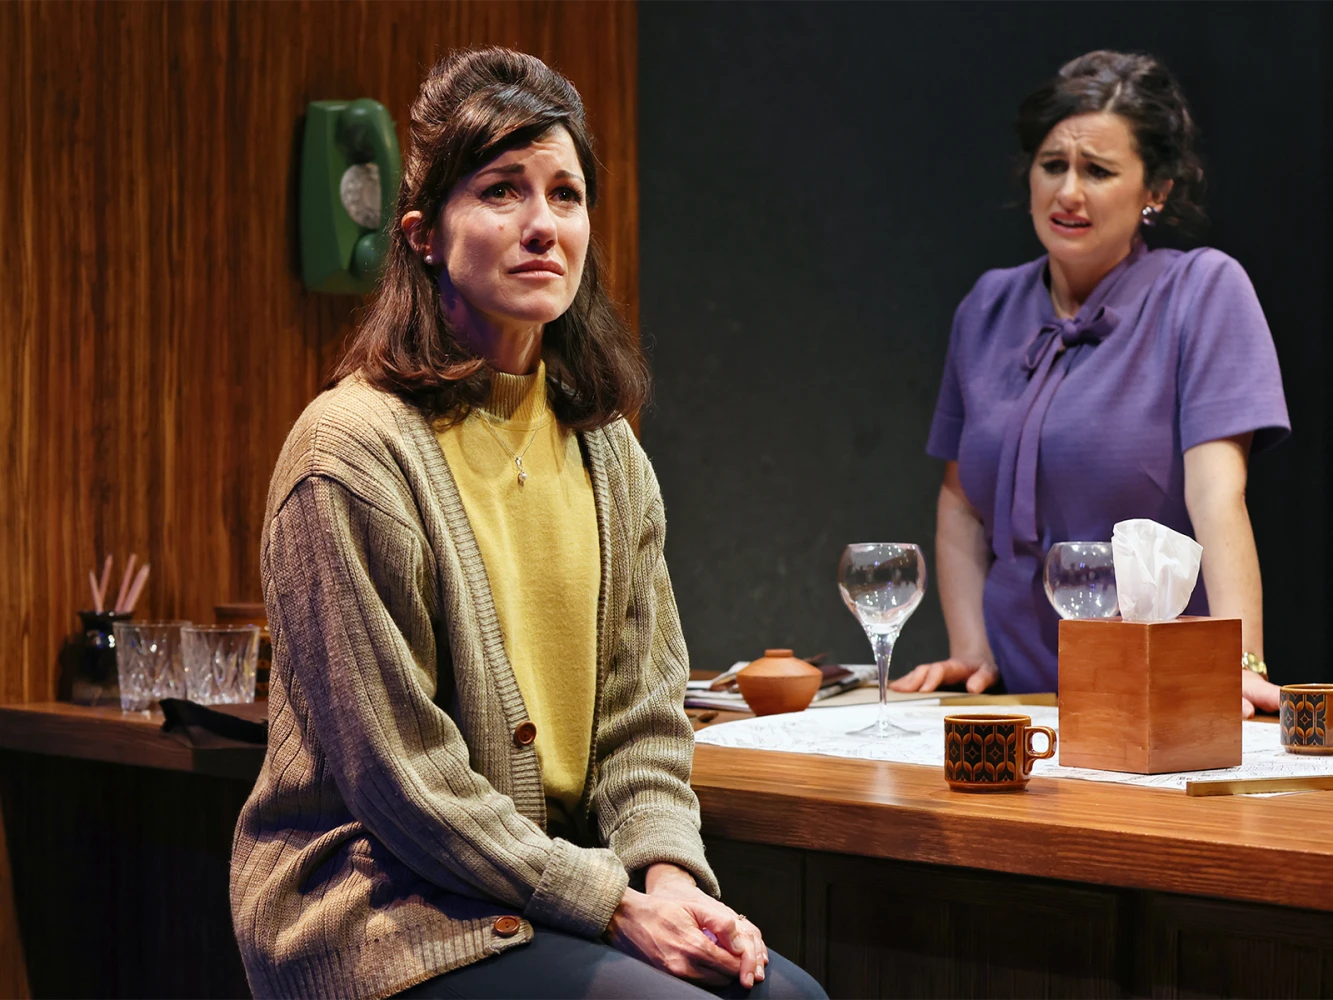 BENEFACTORS at Ensemble Theatre: What to expect - 7